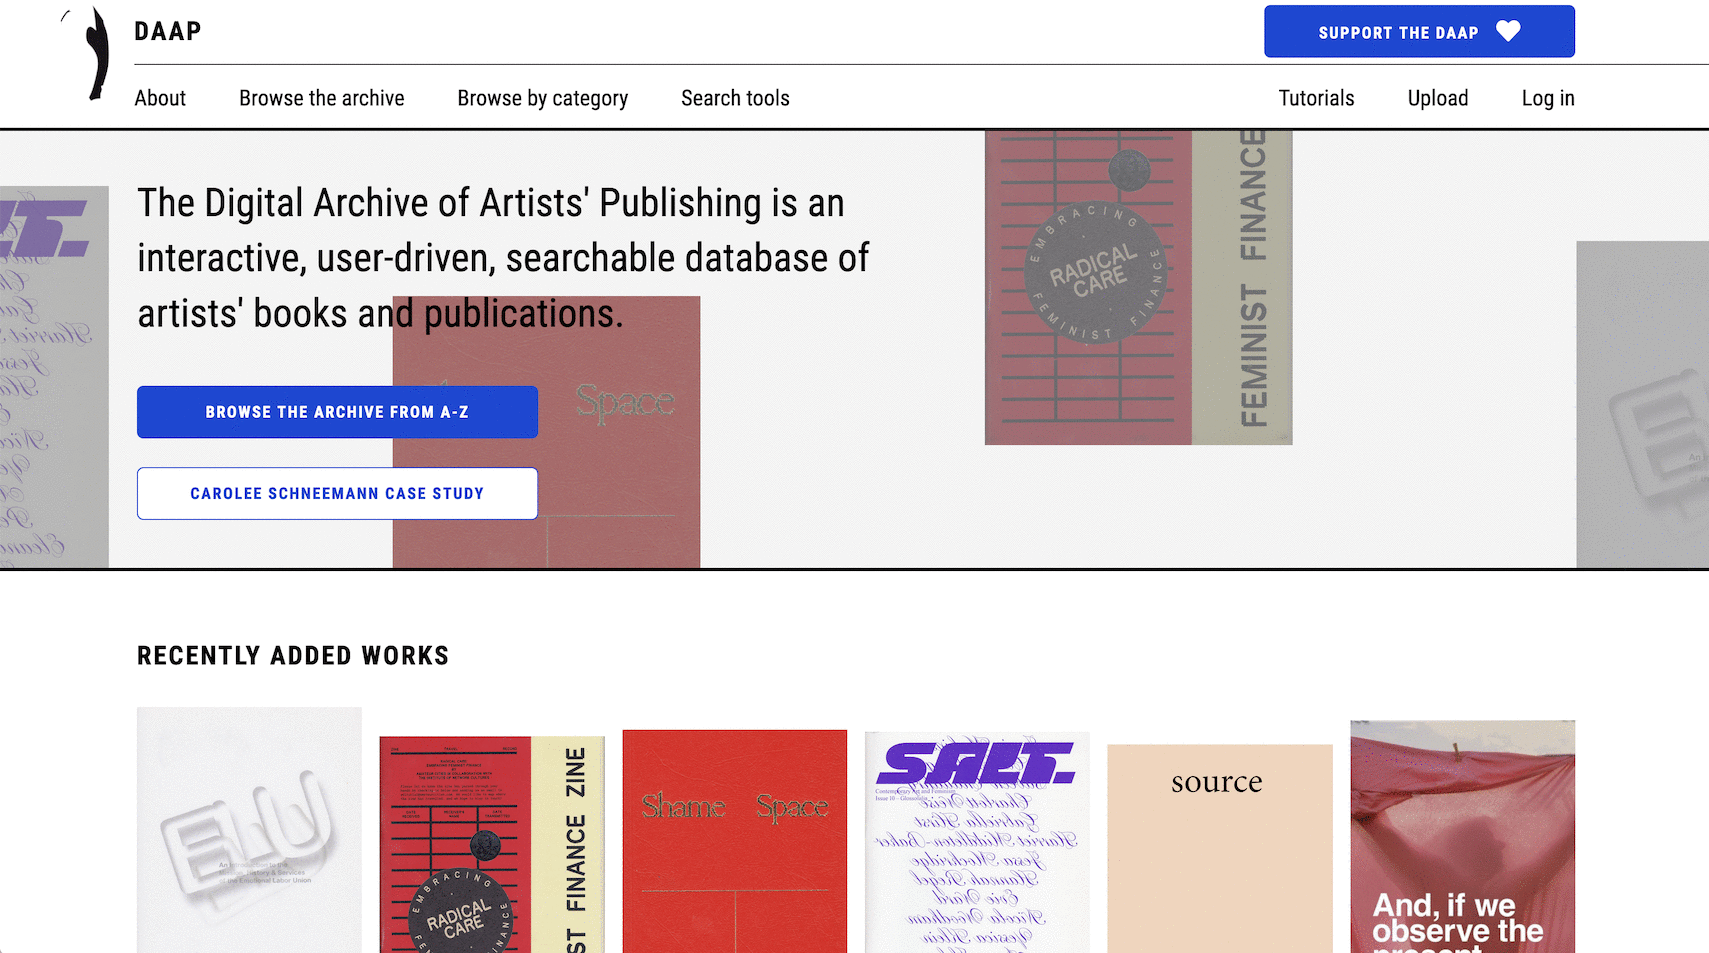 animated gif displaying various pages of the FDigital Archive of Artists Publishing website